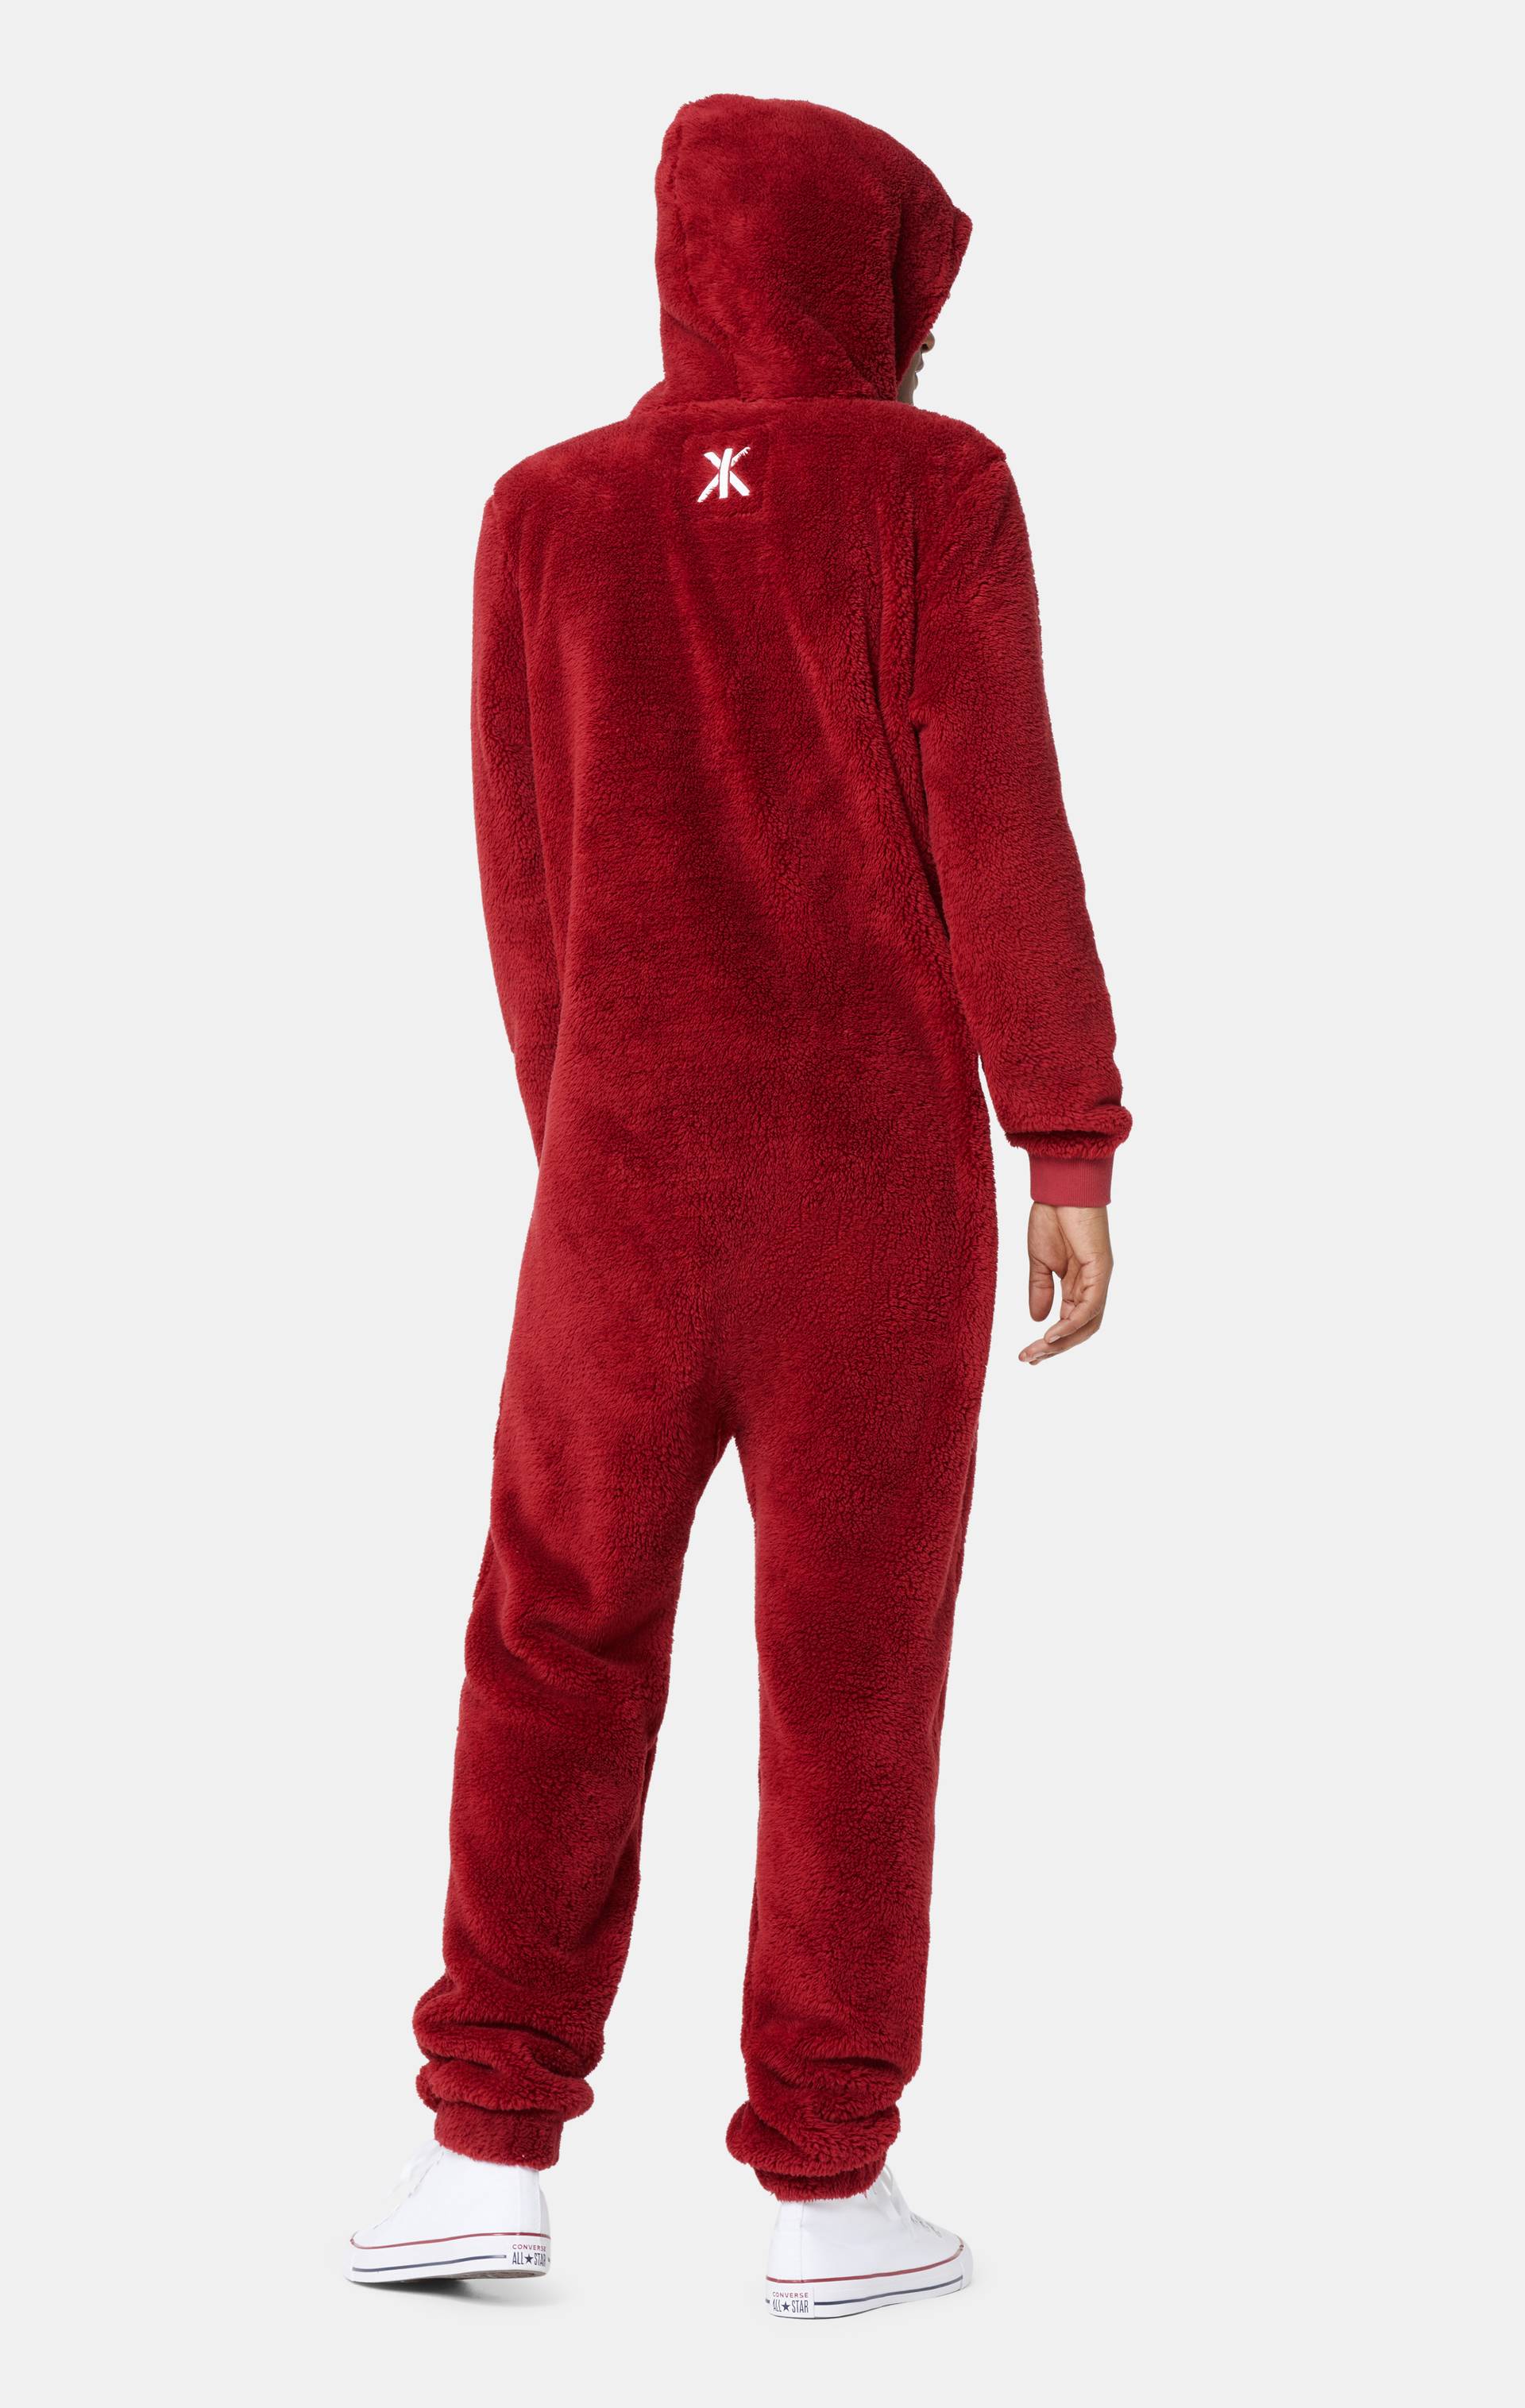 Onepiece The Puppy Jumpsuit Red - 6